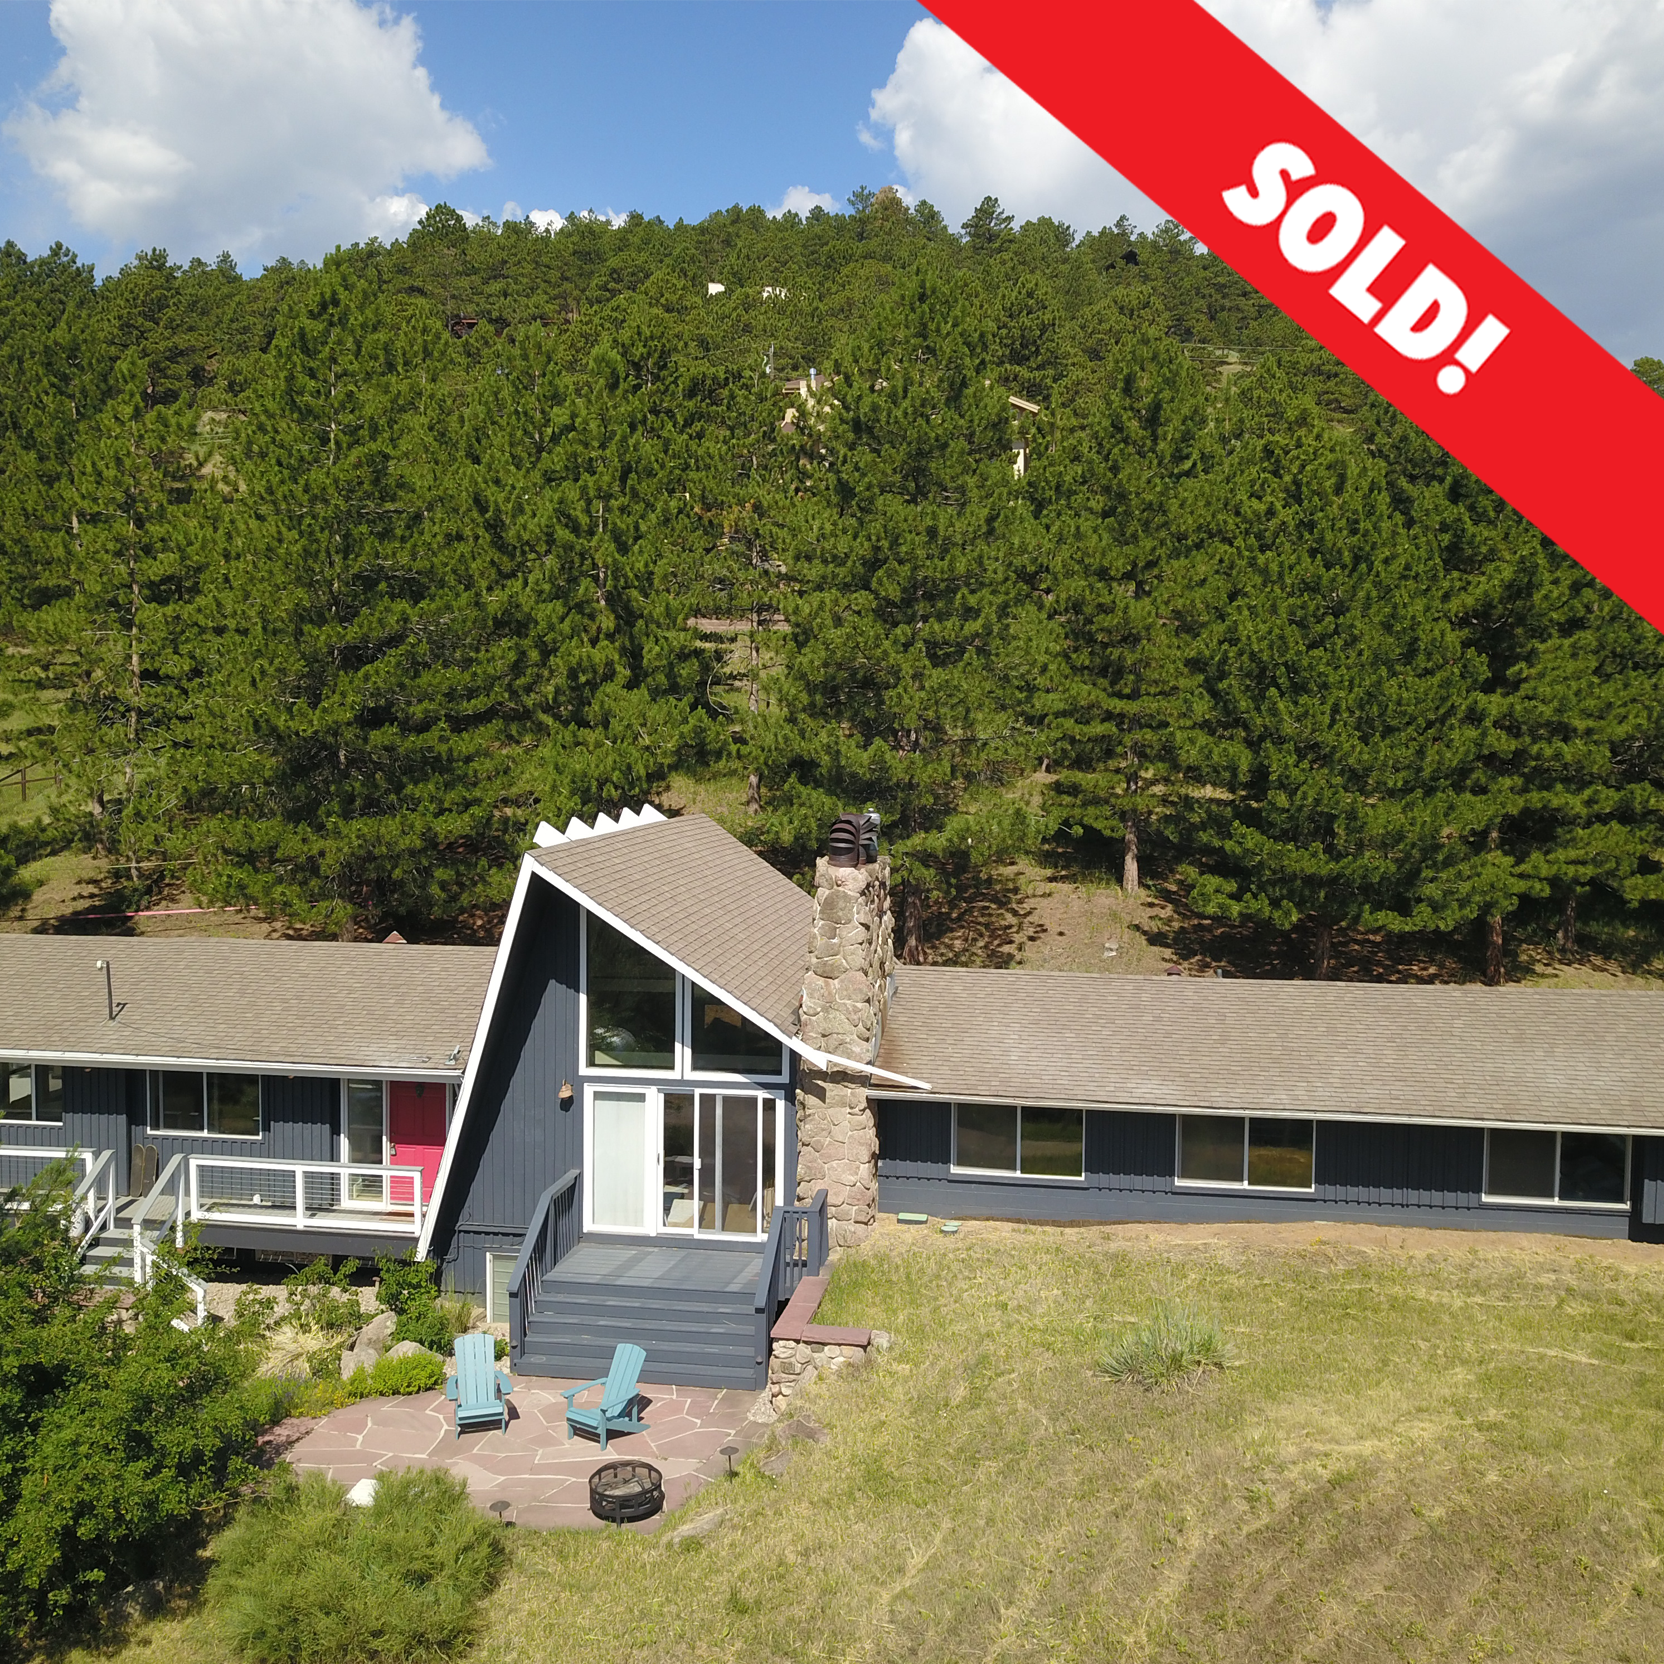  Highlights: Nature, it’s all around you…    Just minutes to Pearl Street and Downtown Boulder, yet a world away on your own 2 acres of serenity and privacy. Soak in the stunning sunrise and views looking out over Sanitas Mountain at the city lights 